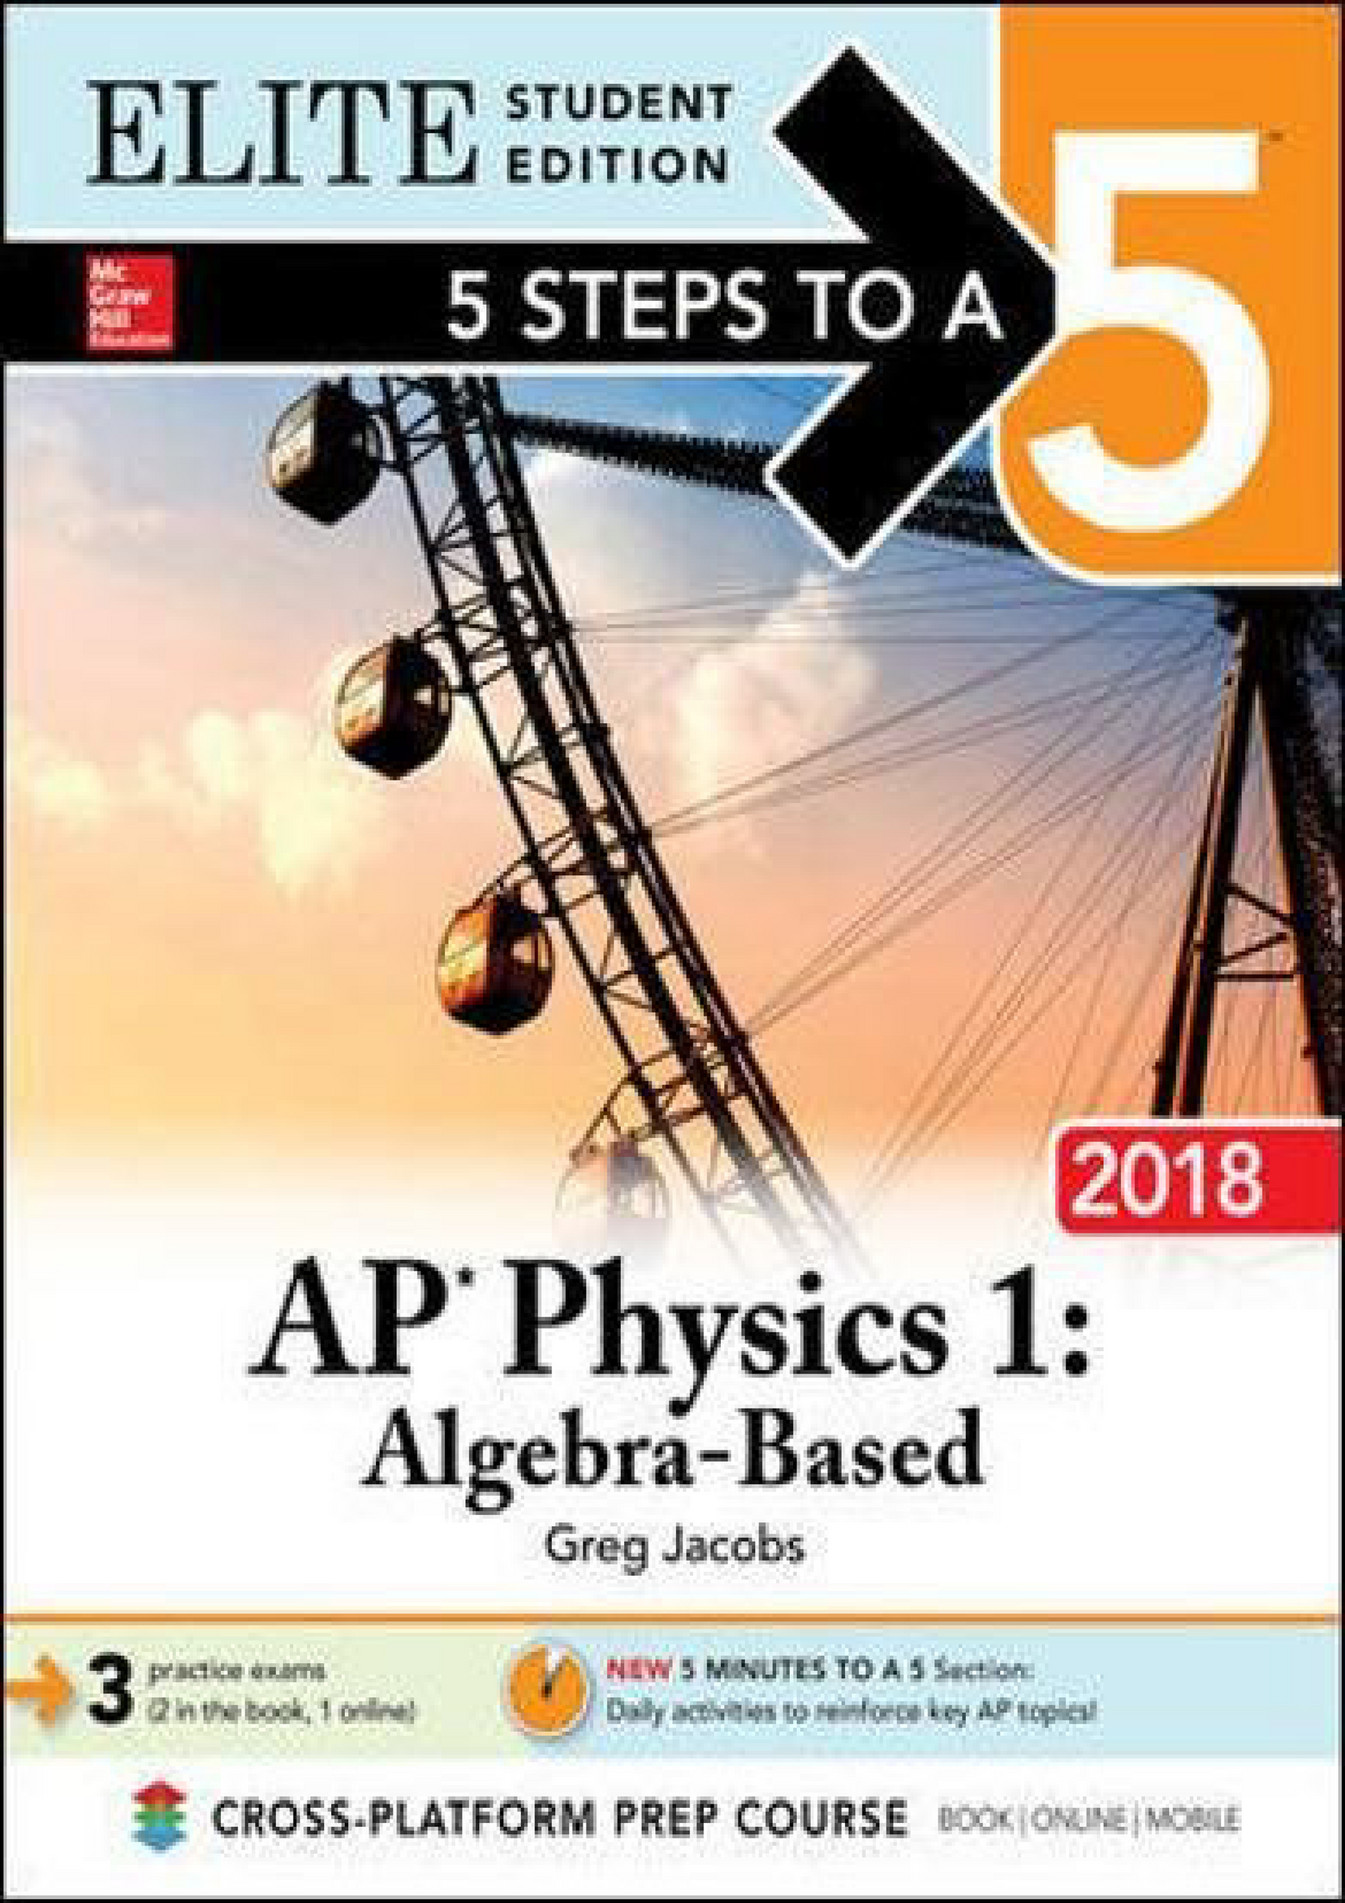 Deirdre DOOWNLOAD 5 Steps to a 5 AP Physics 1 Algebra Based 2018 Elite Student Edition Page